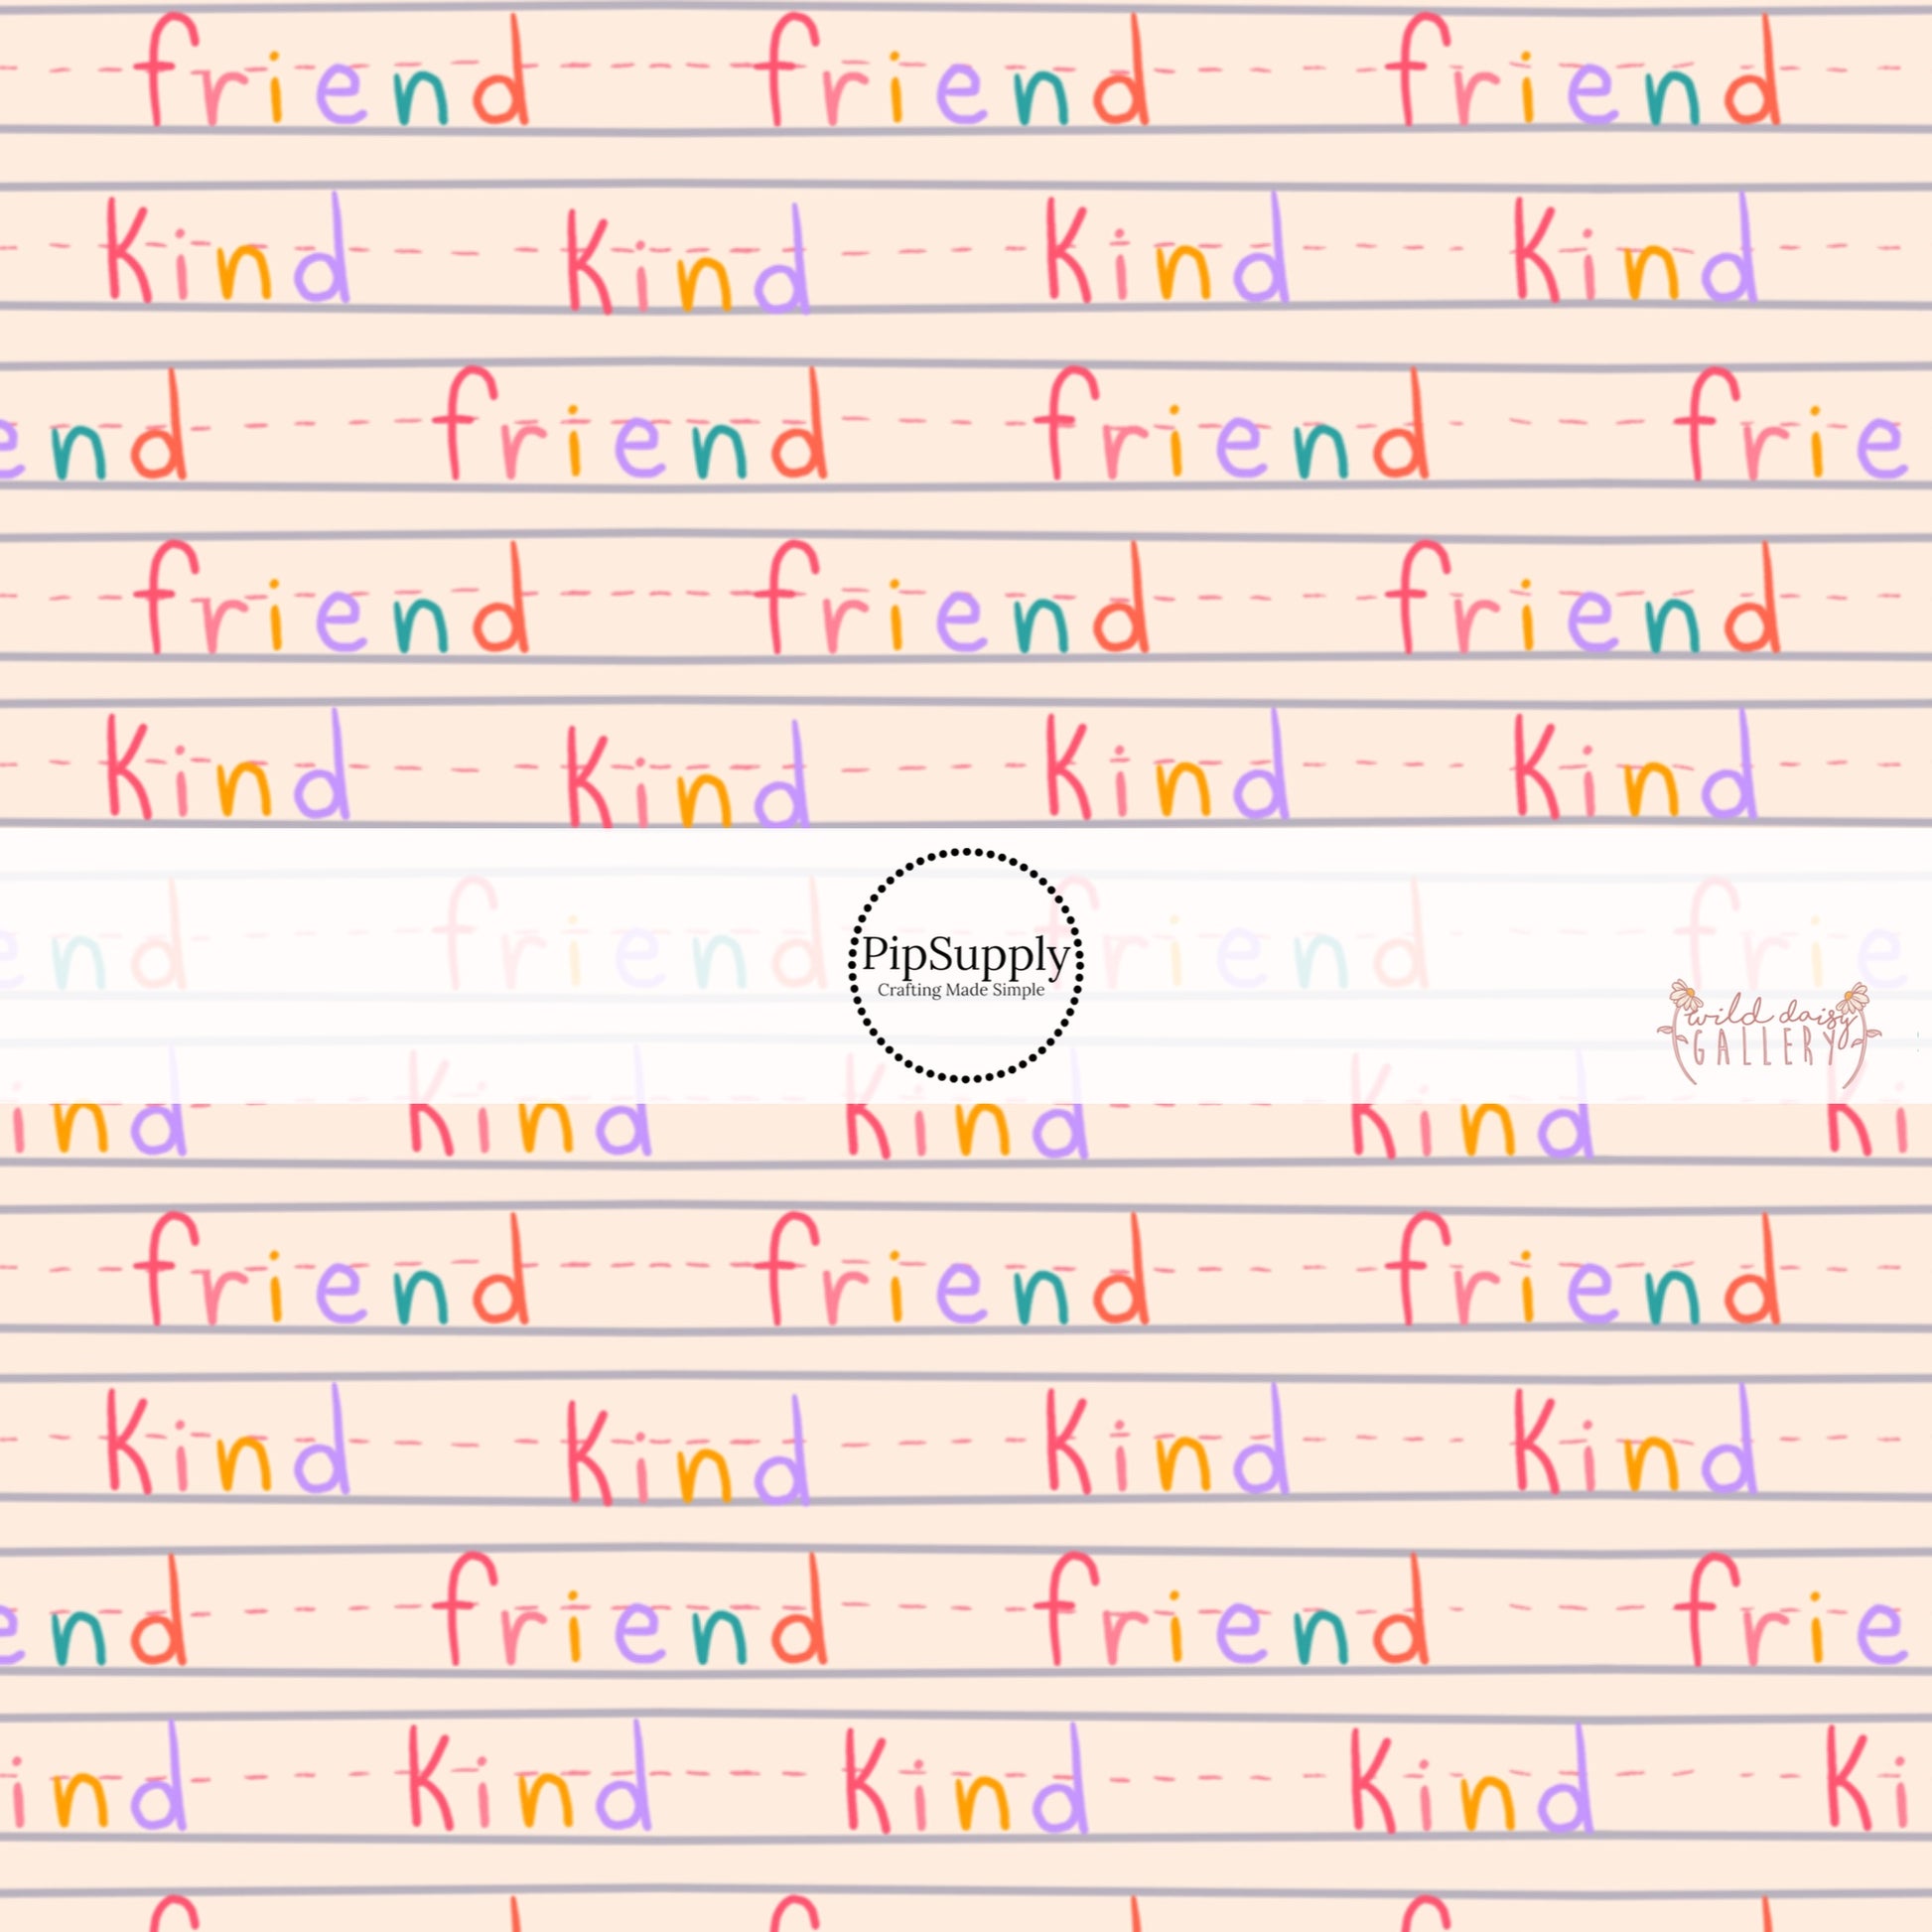 Cream school paper with kind and friend words written in colors bow strips